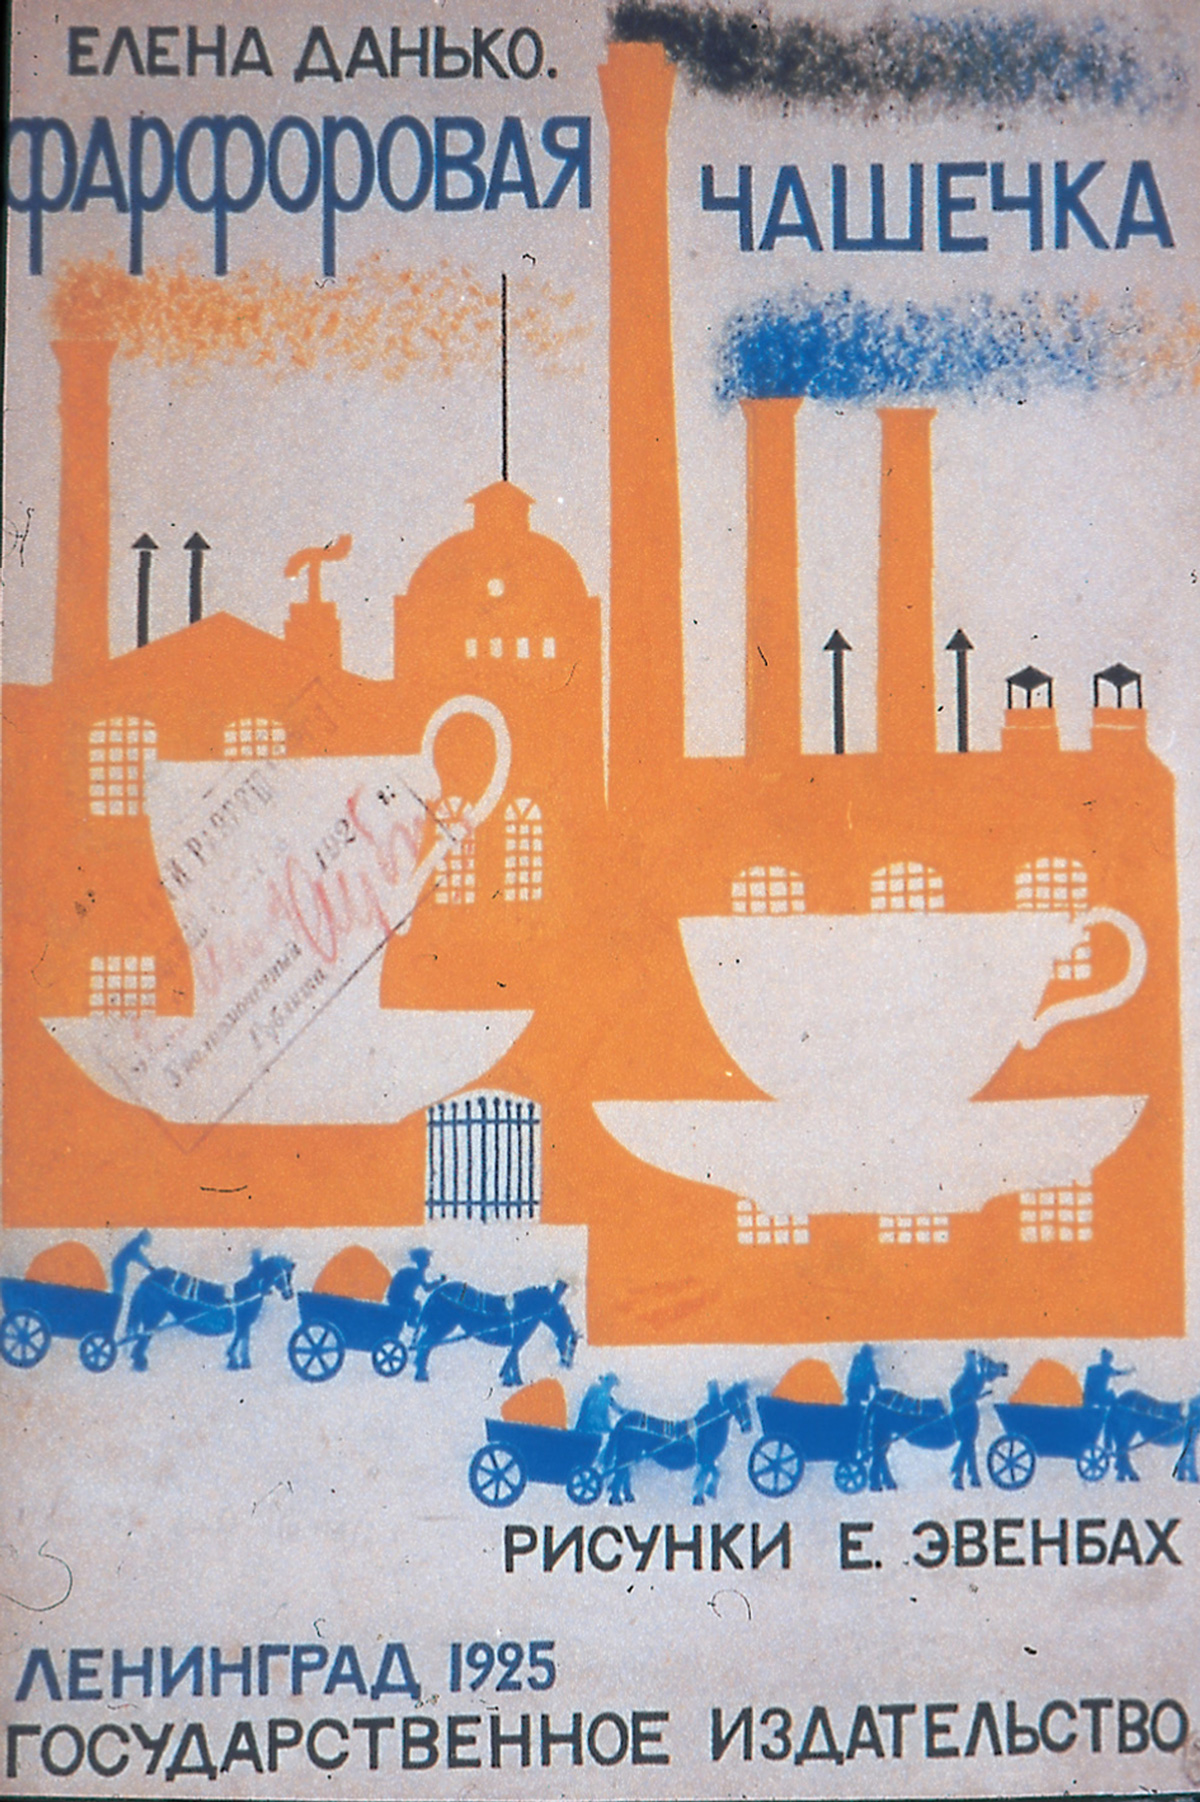 Cover of Porcelain Cup (Leningrad: Gosudarstvennoe izdatel’stvo, 1925), the George Riabov Collection of Russian Art, the Jane Voorhees Zimmerli Art Museum, Rutgers, the State University of New Jersey.